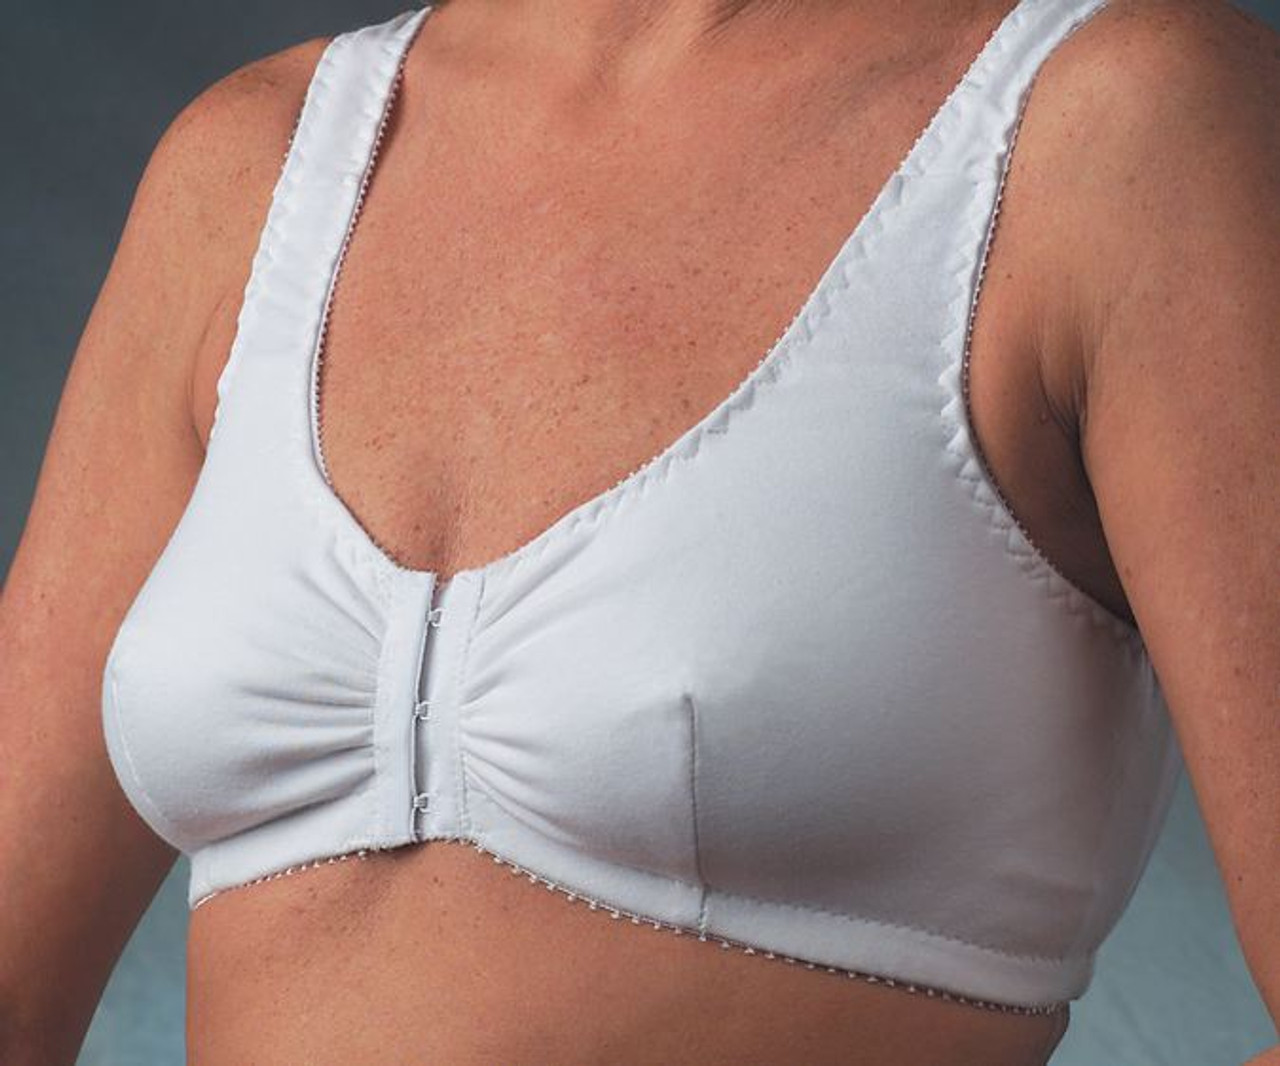 Camisole Mastectomy Bra with great breast support -Order at GraceMd